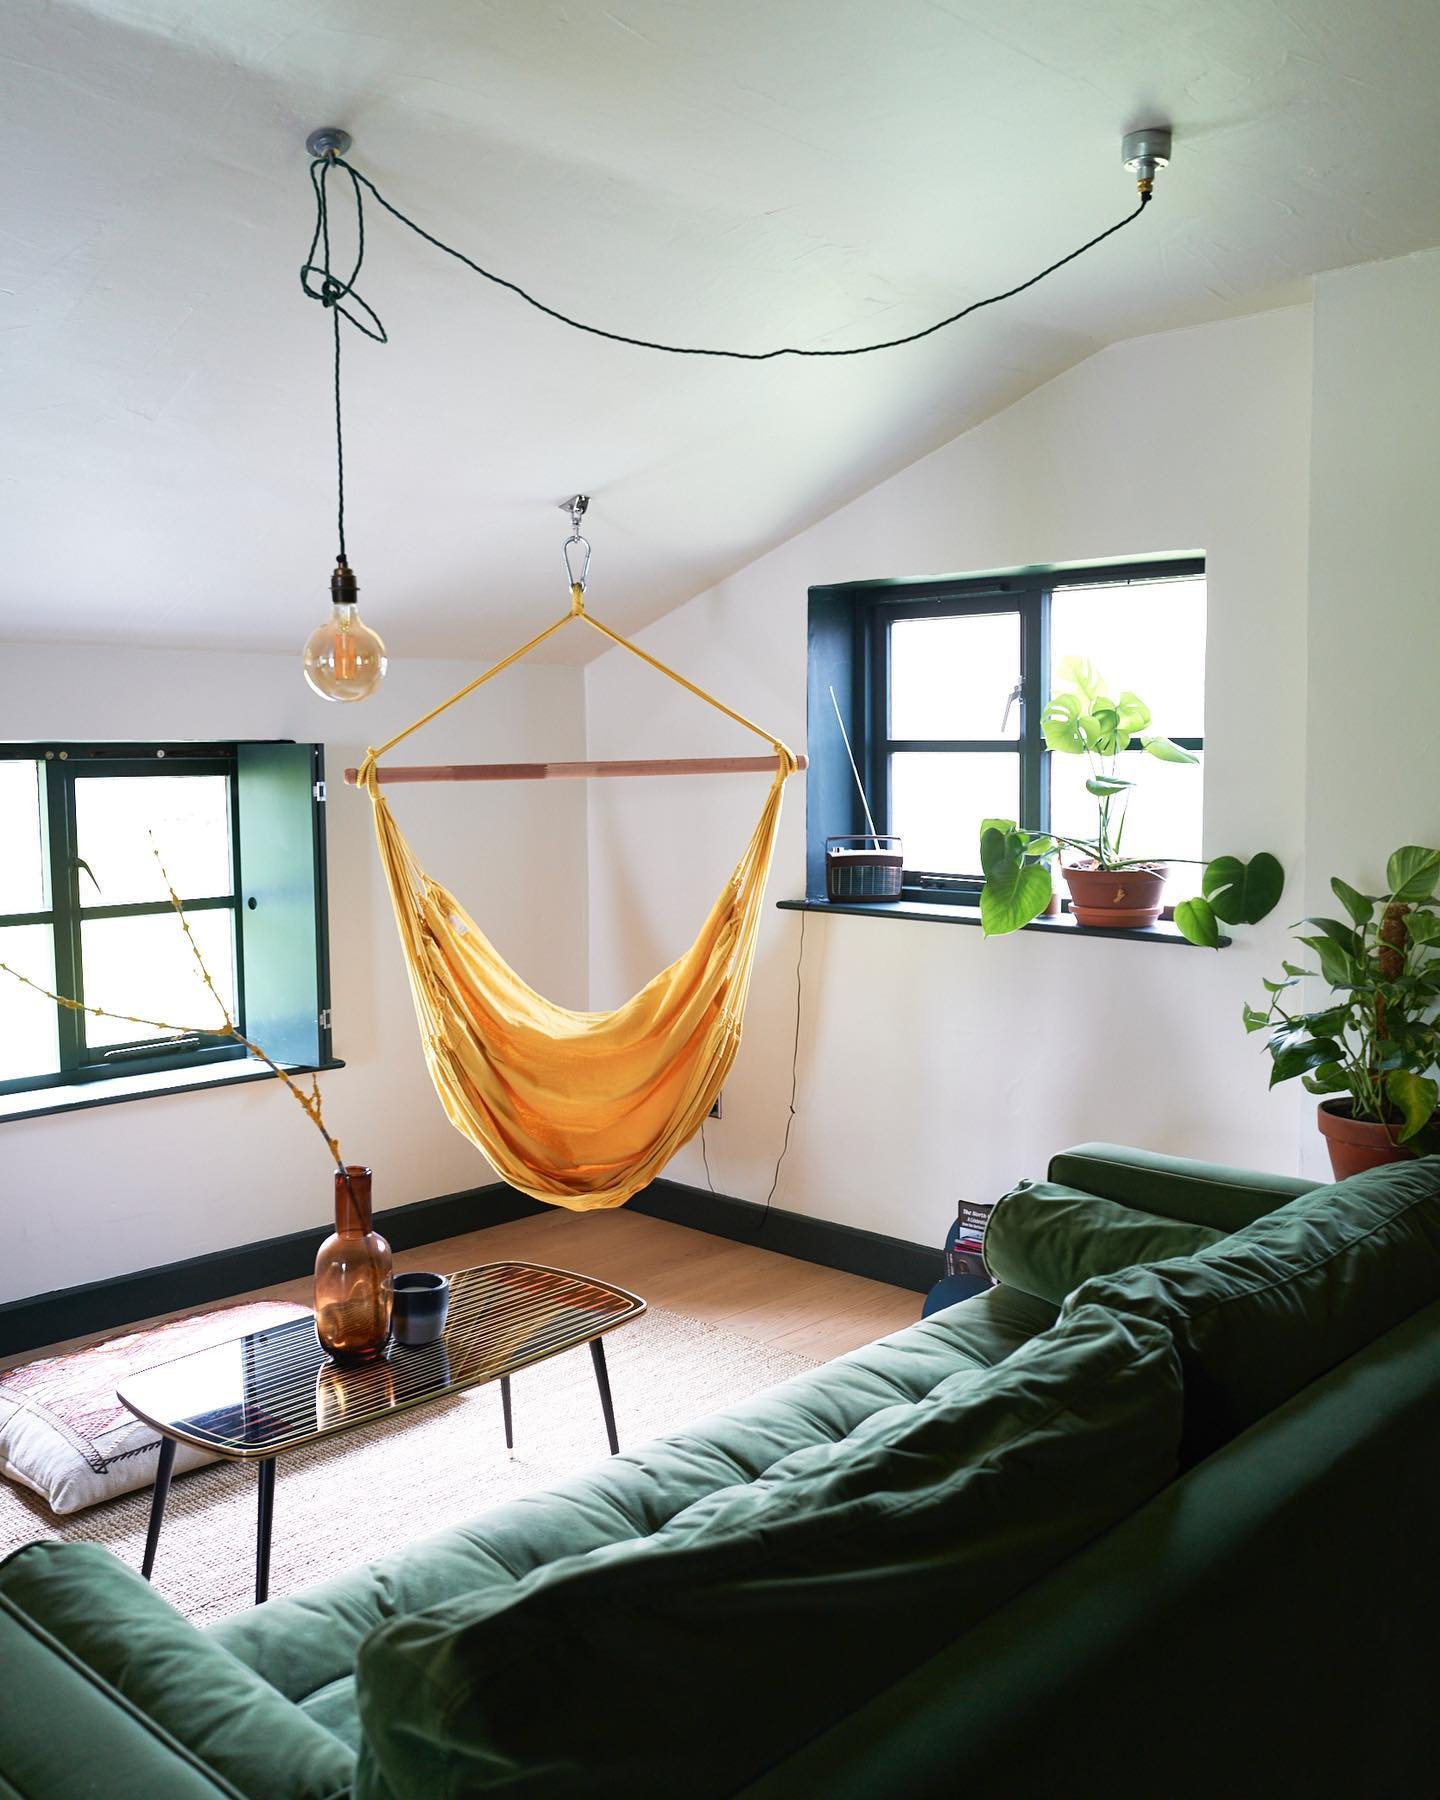 &ldquo;The Artist Barn is stylish and serene (and happy!) and was a cozy place to relax after days out walking. (I fell in love with the hammock chair and have since installed one at home!) Ania and Henry had great advice that led us to spectacular b